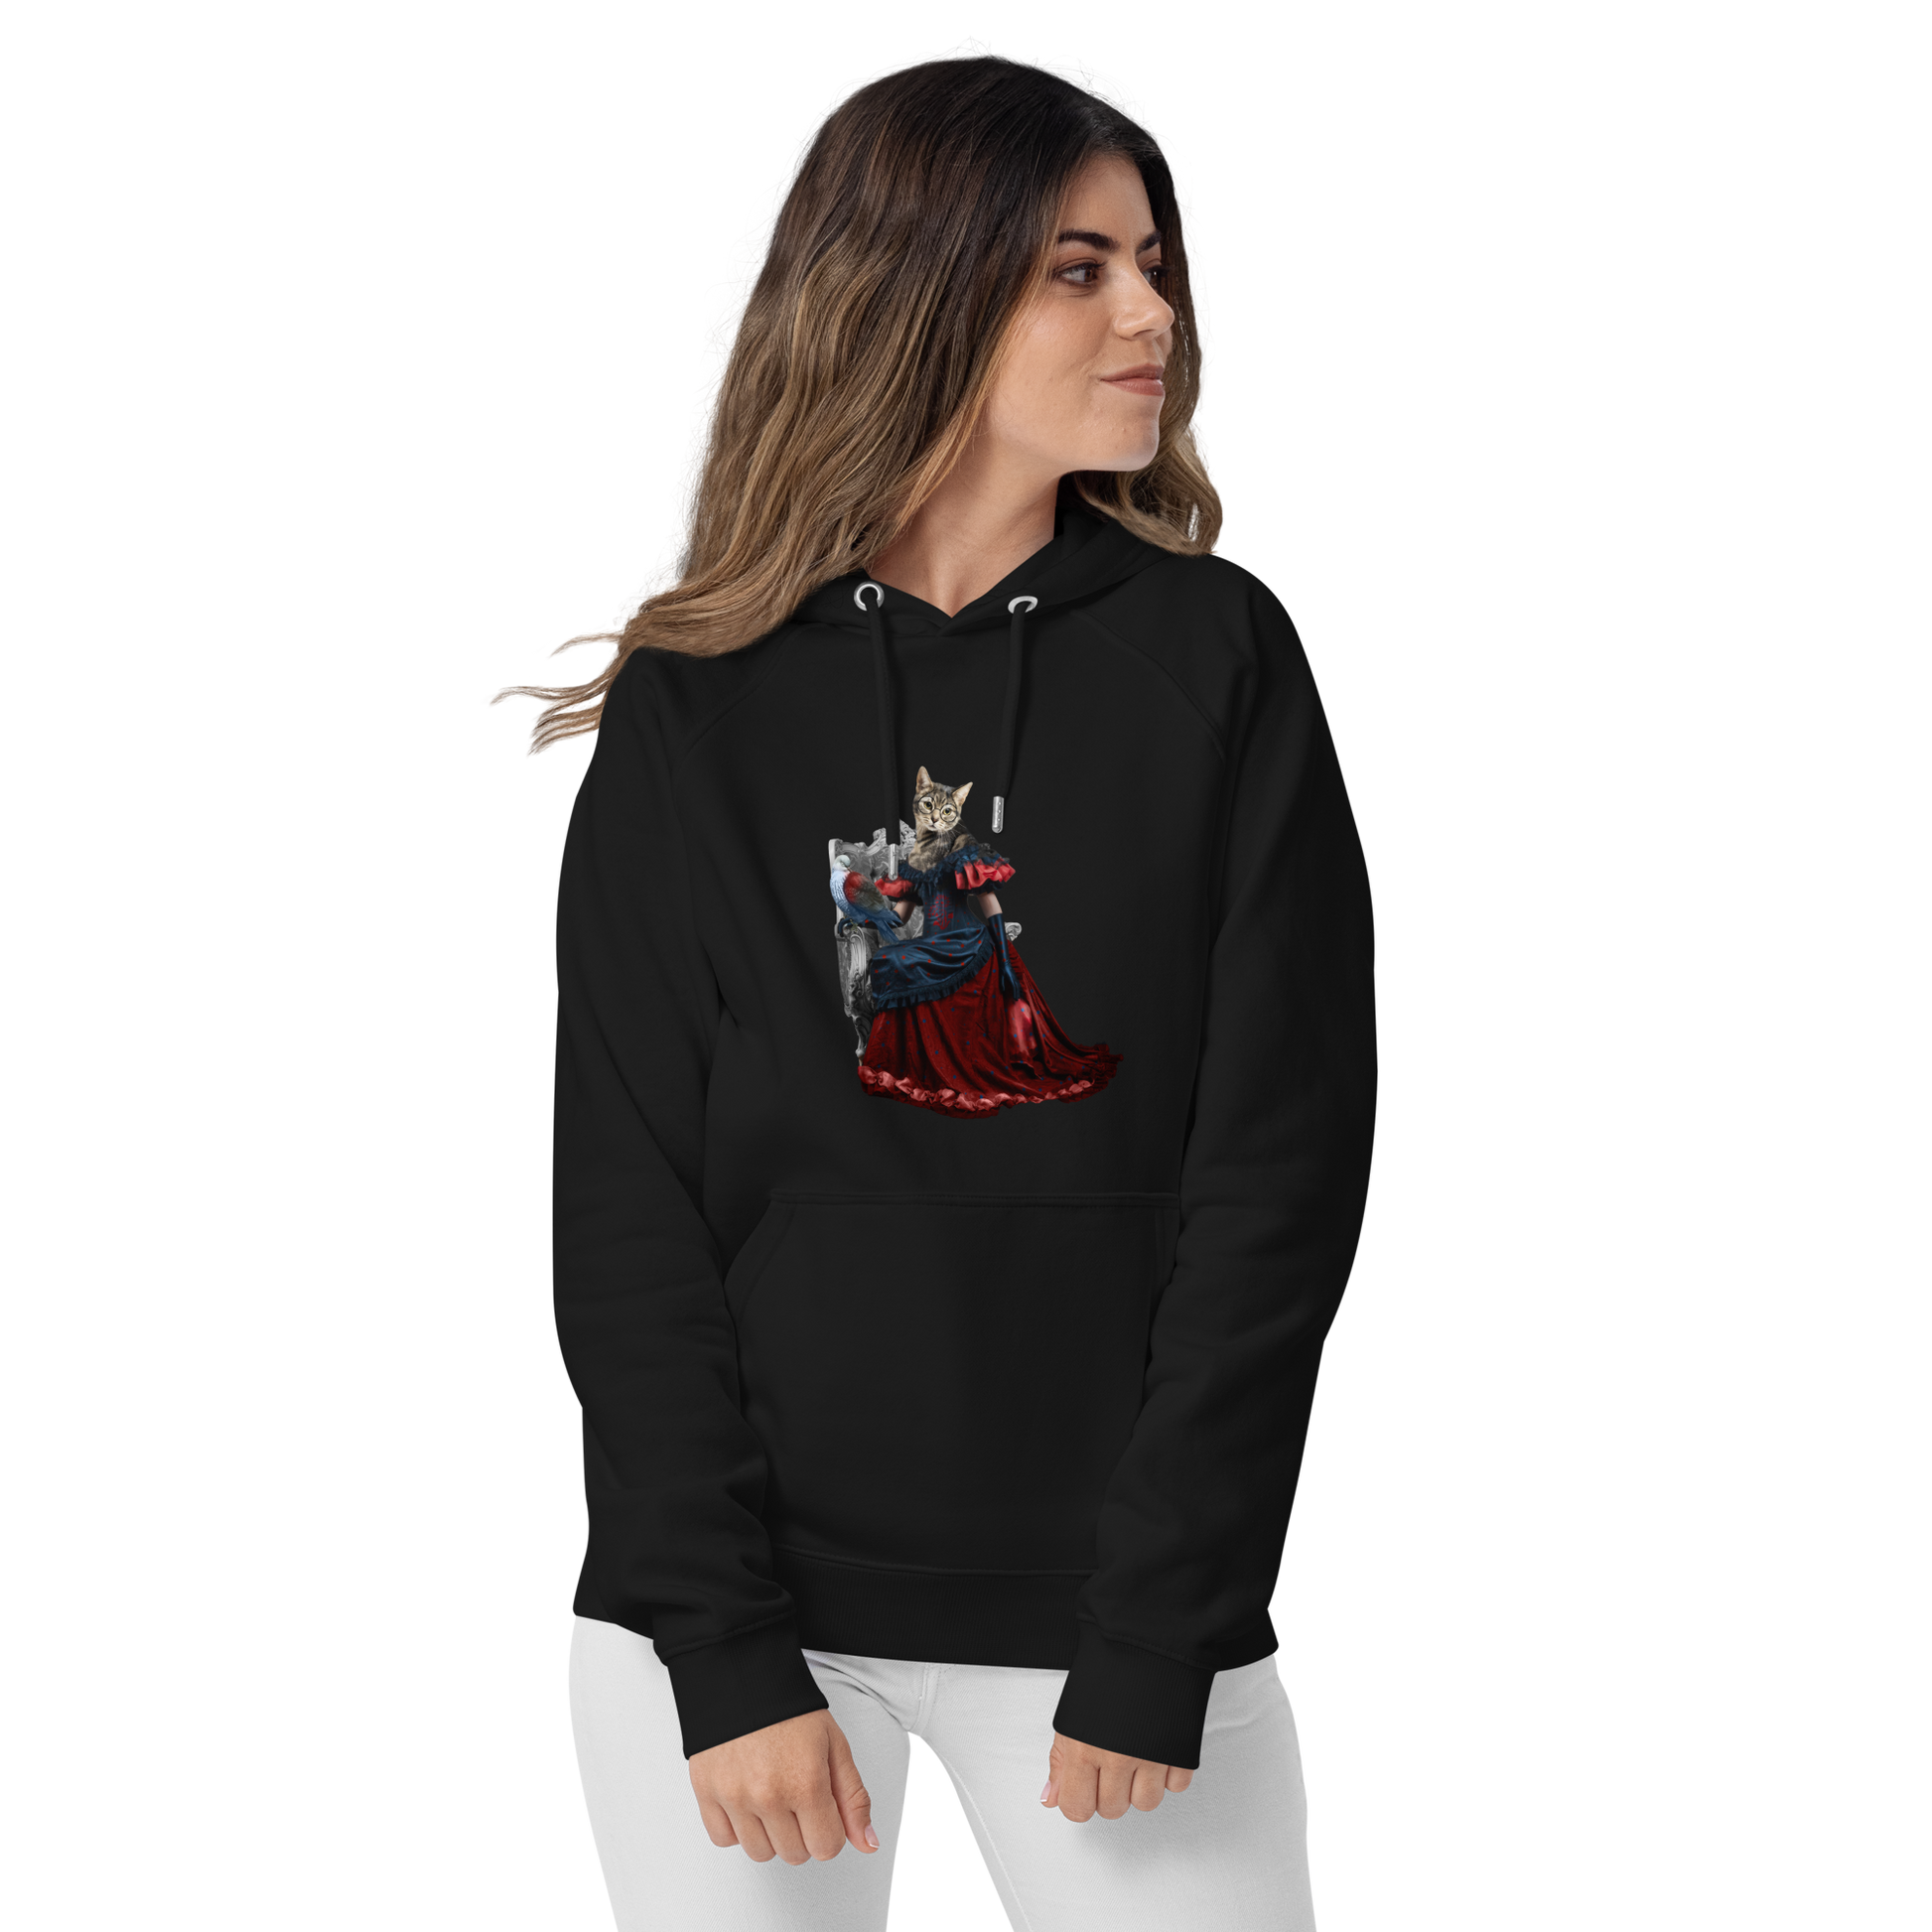 Woman Wearing a Black Anthropomorphic Cat Raglan Hoodie featuring an adorable Anthropomorphic Cat graphic on the chest - Cute Graphic Cat Hoodies - Boozy Fox